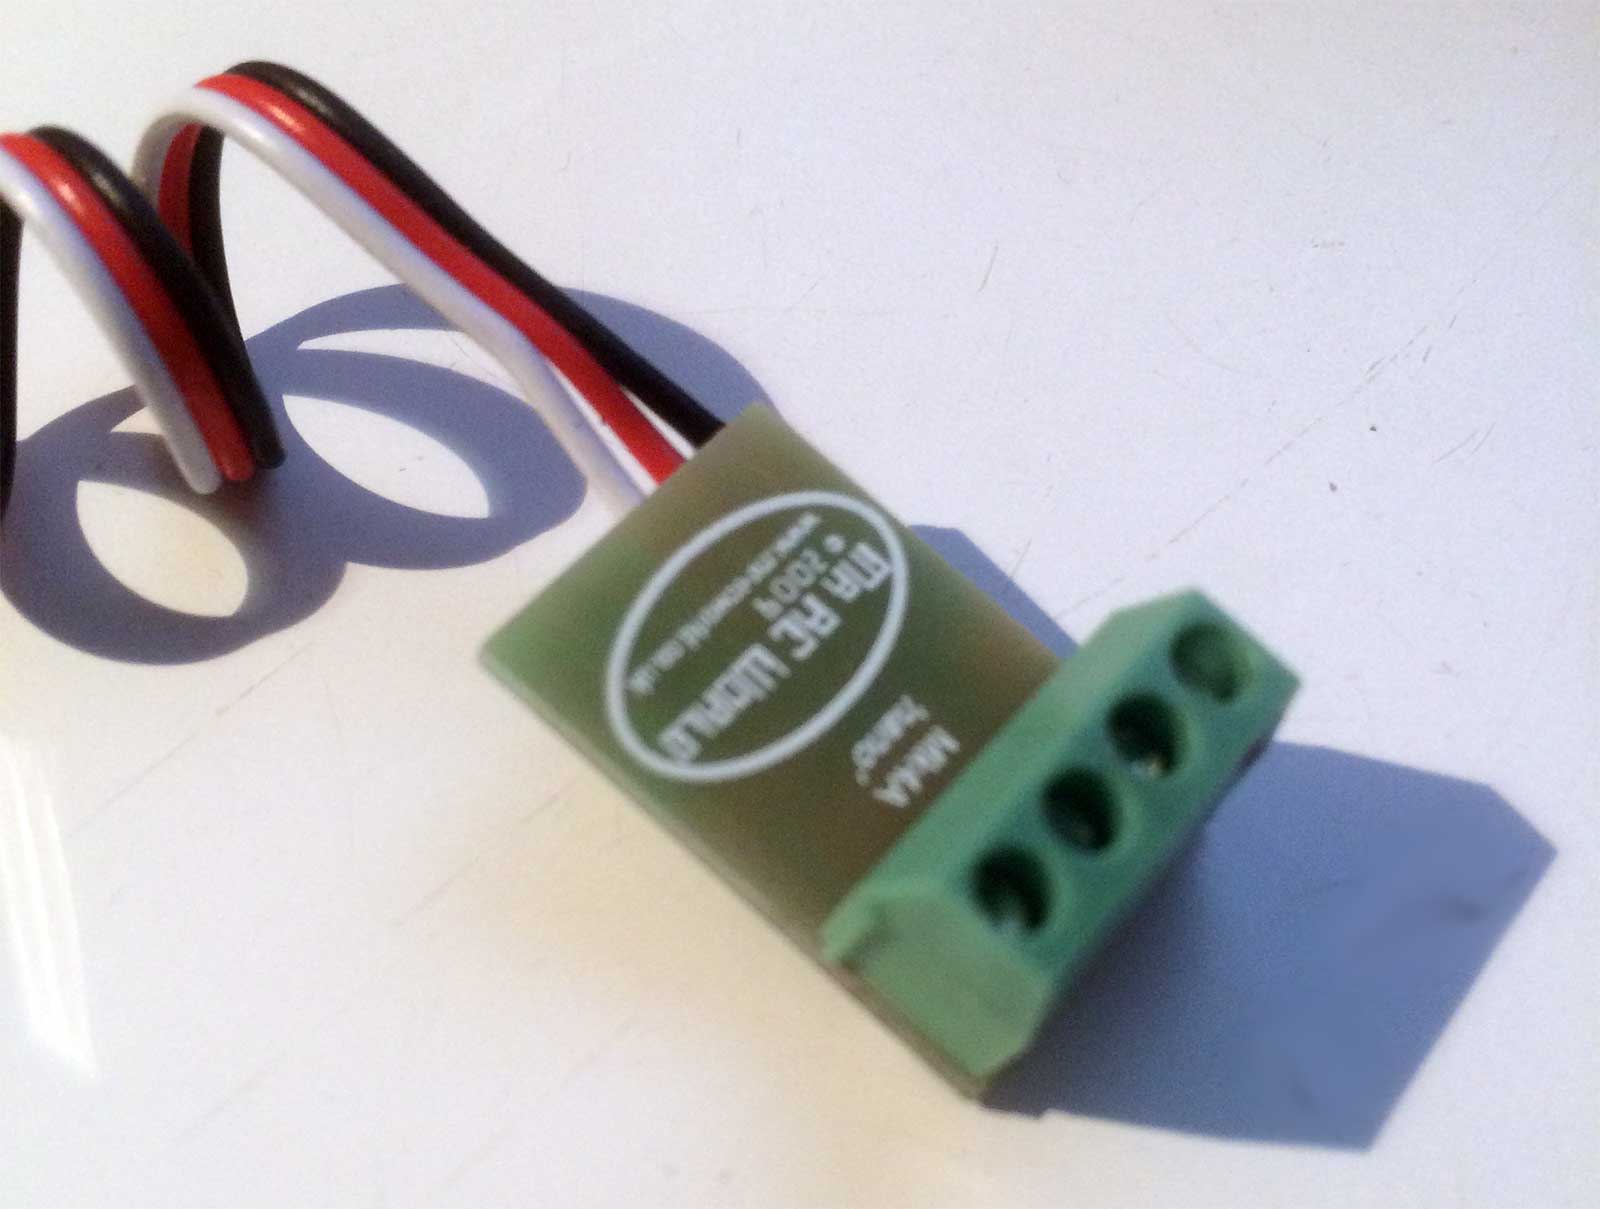 RC MOSFET Switch with Adjustable Switch Point for Model Boats/Cars and Planes 